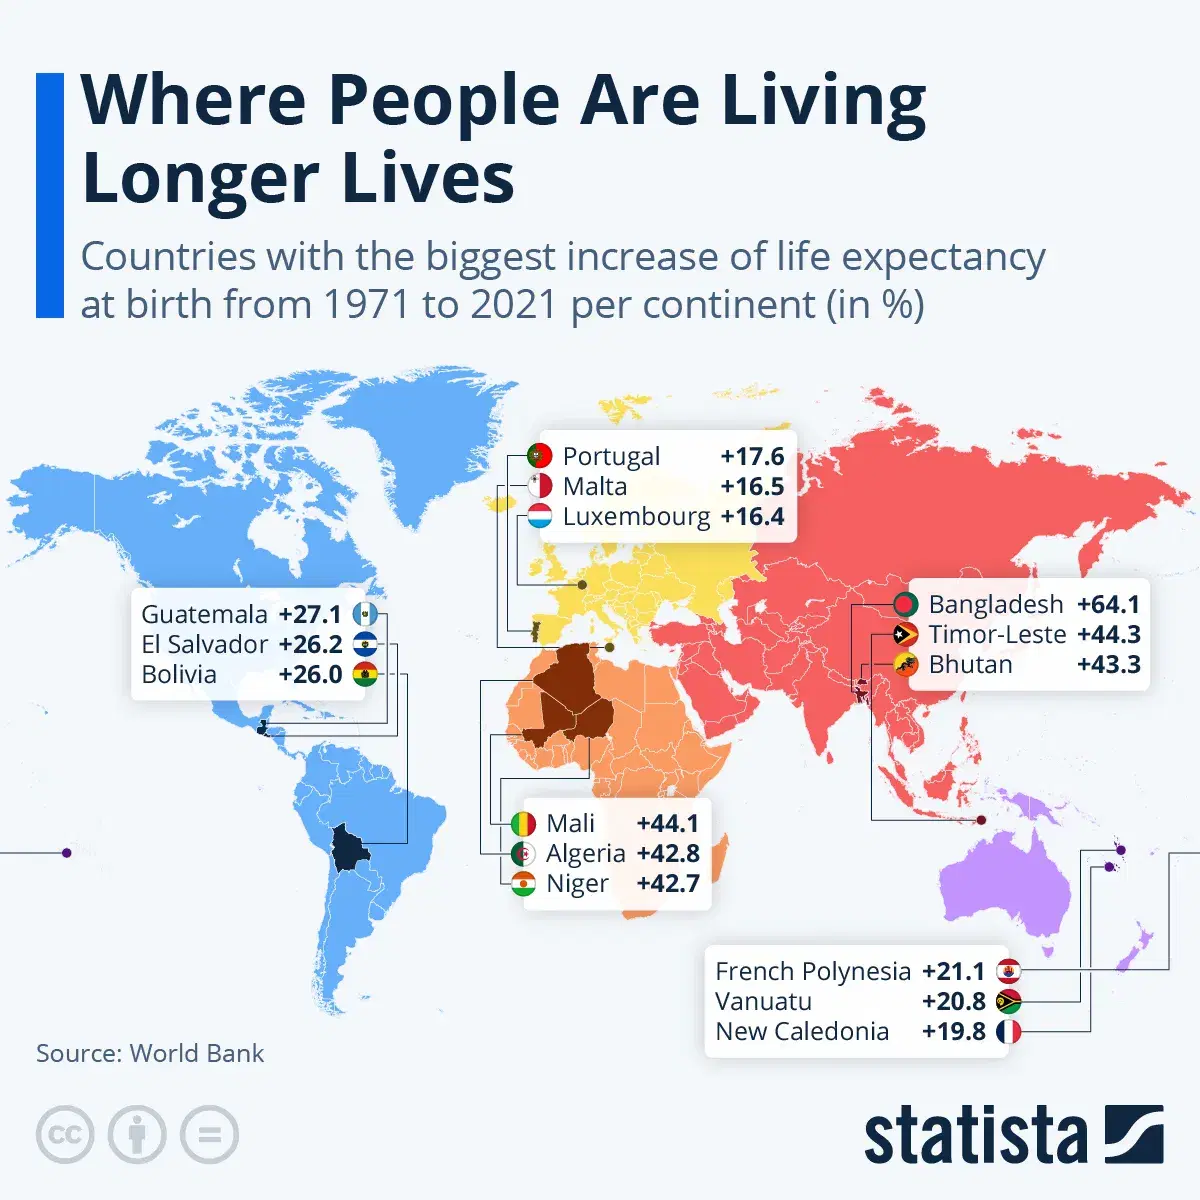 Where Has Life Expectancy Increased?